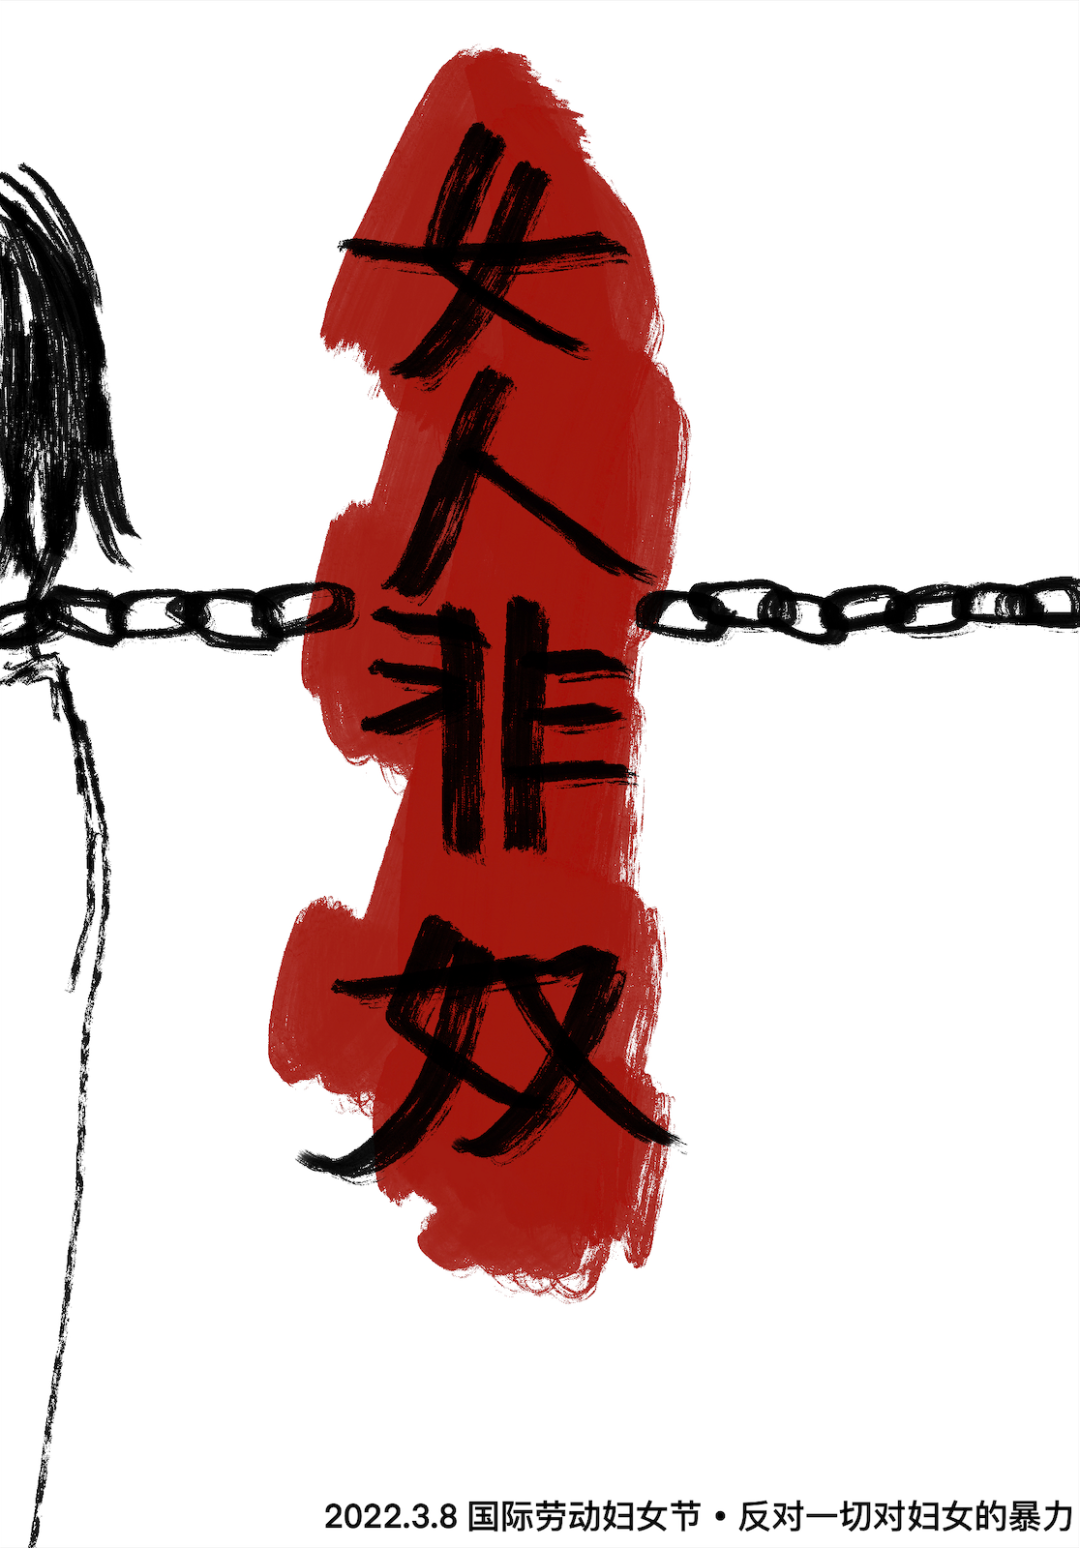 A white poster with black sketching shows a woman, partially visible at the left side, and a chain around her neck which stretches to a red stain at the center and the words, “Women are not slaves.” Text at bottom reads, “International Working Women's Day. Fight all forms of violence against women.”